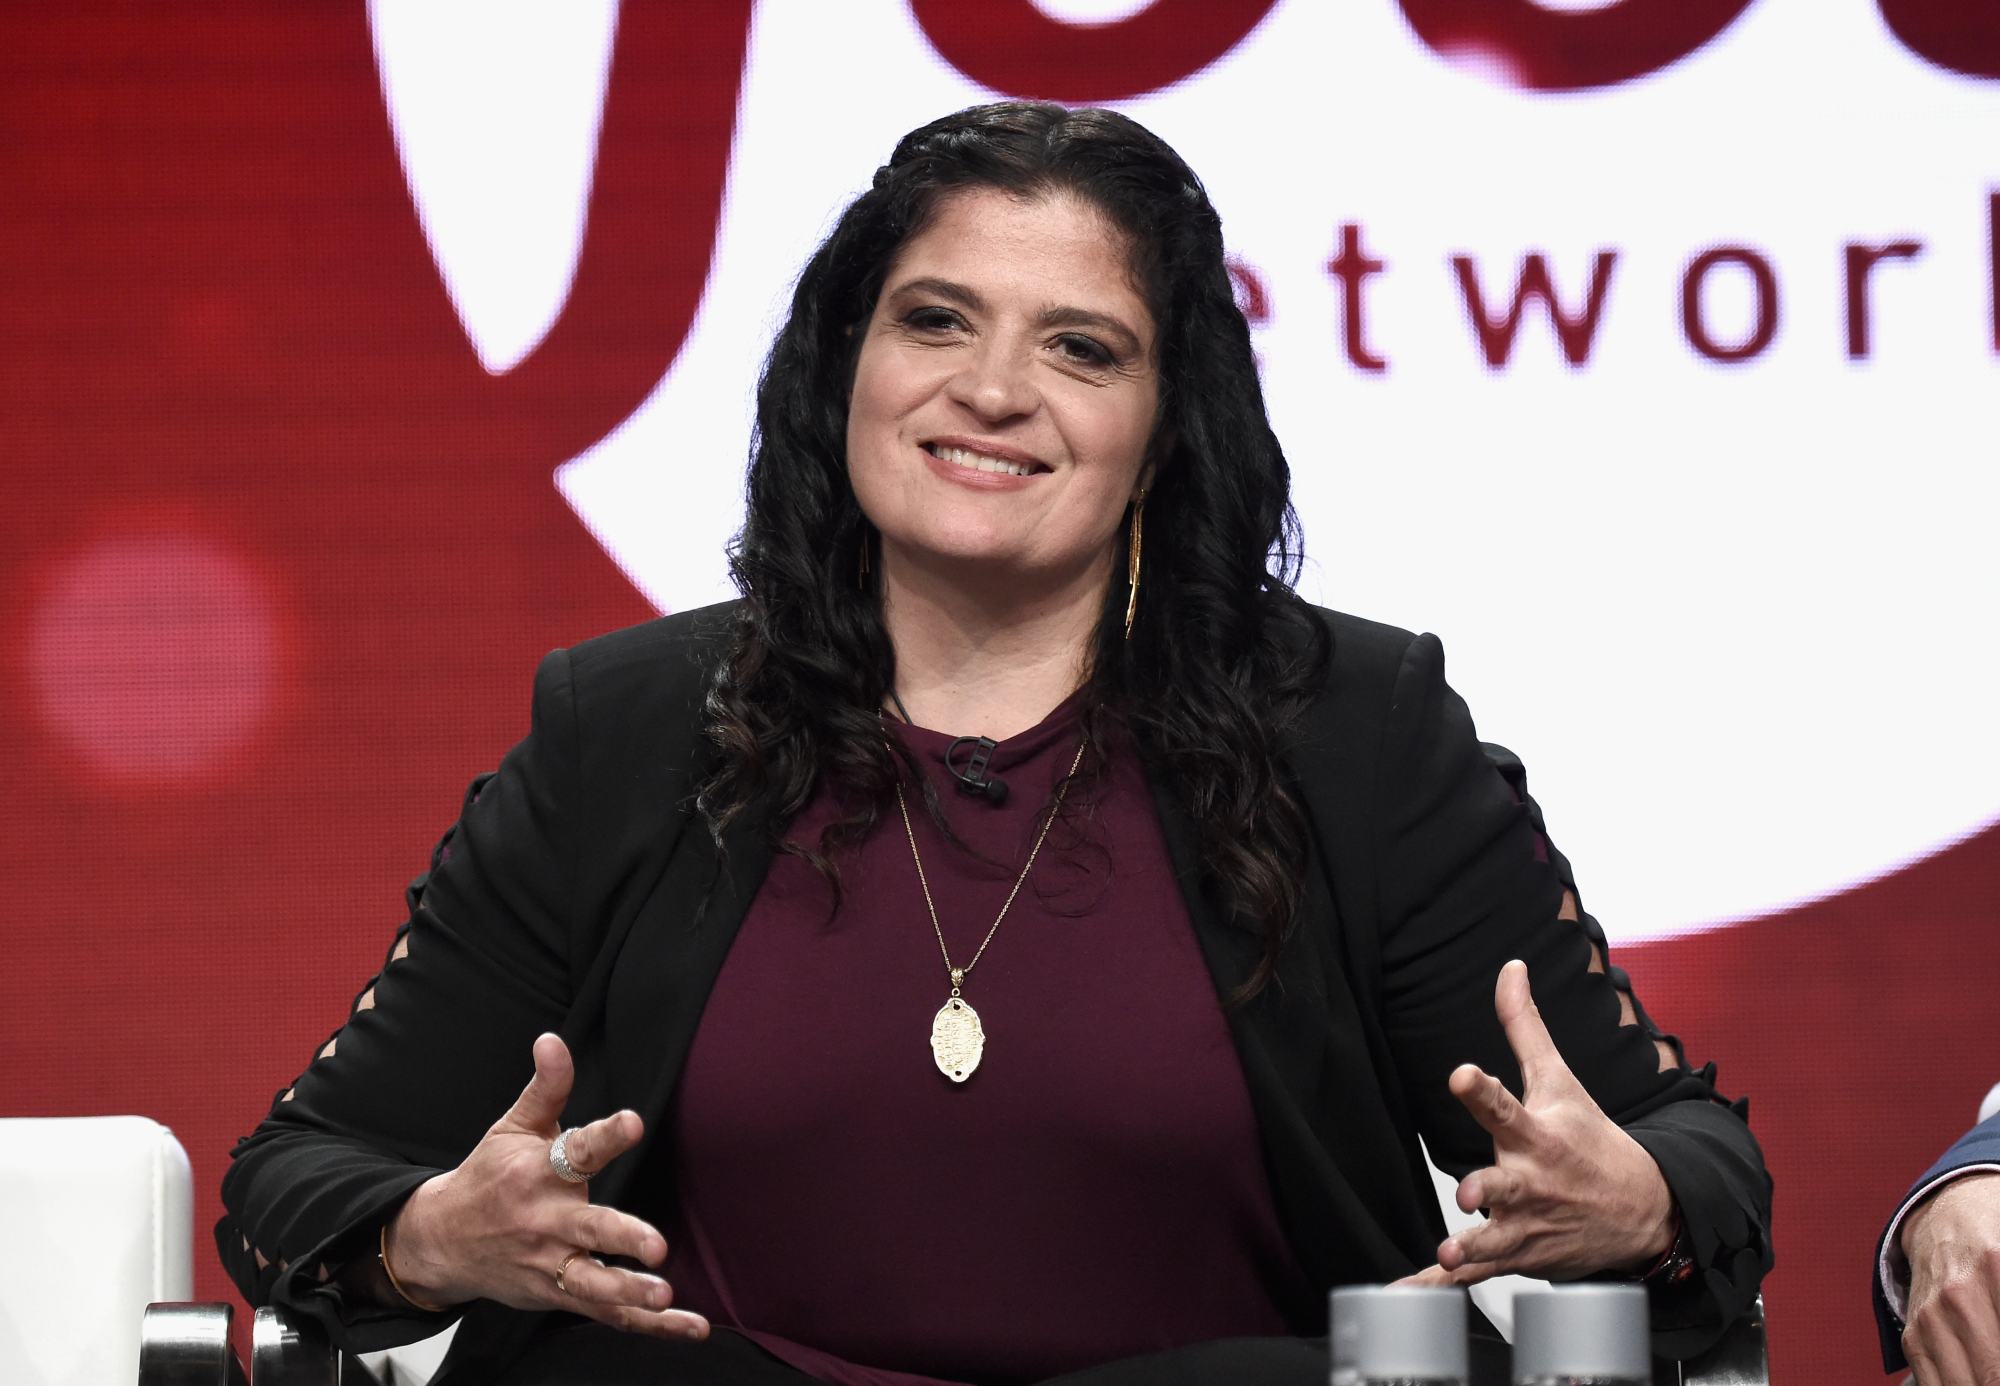 Alex Guarnaschelli smiling, talking with her hands in front of the Food Network logo.